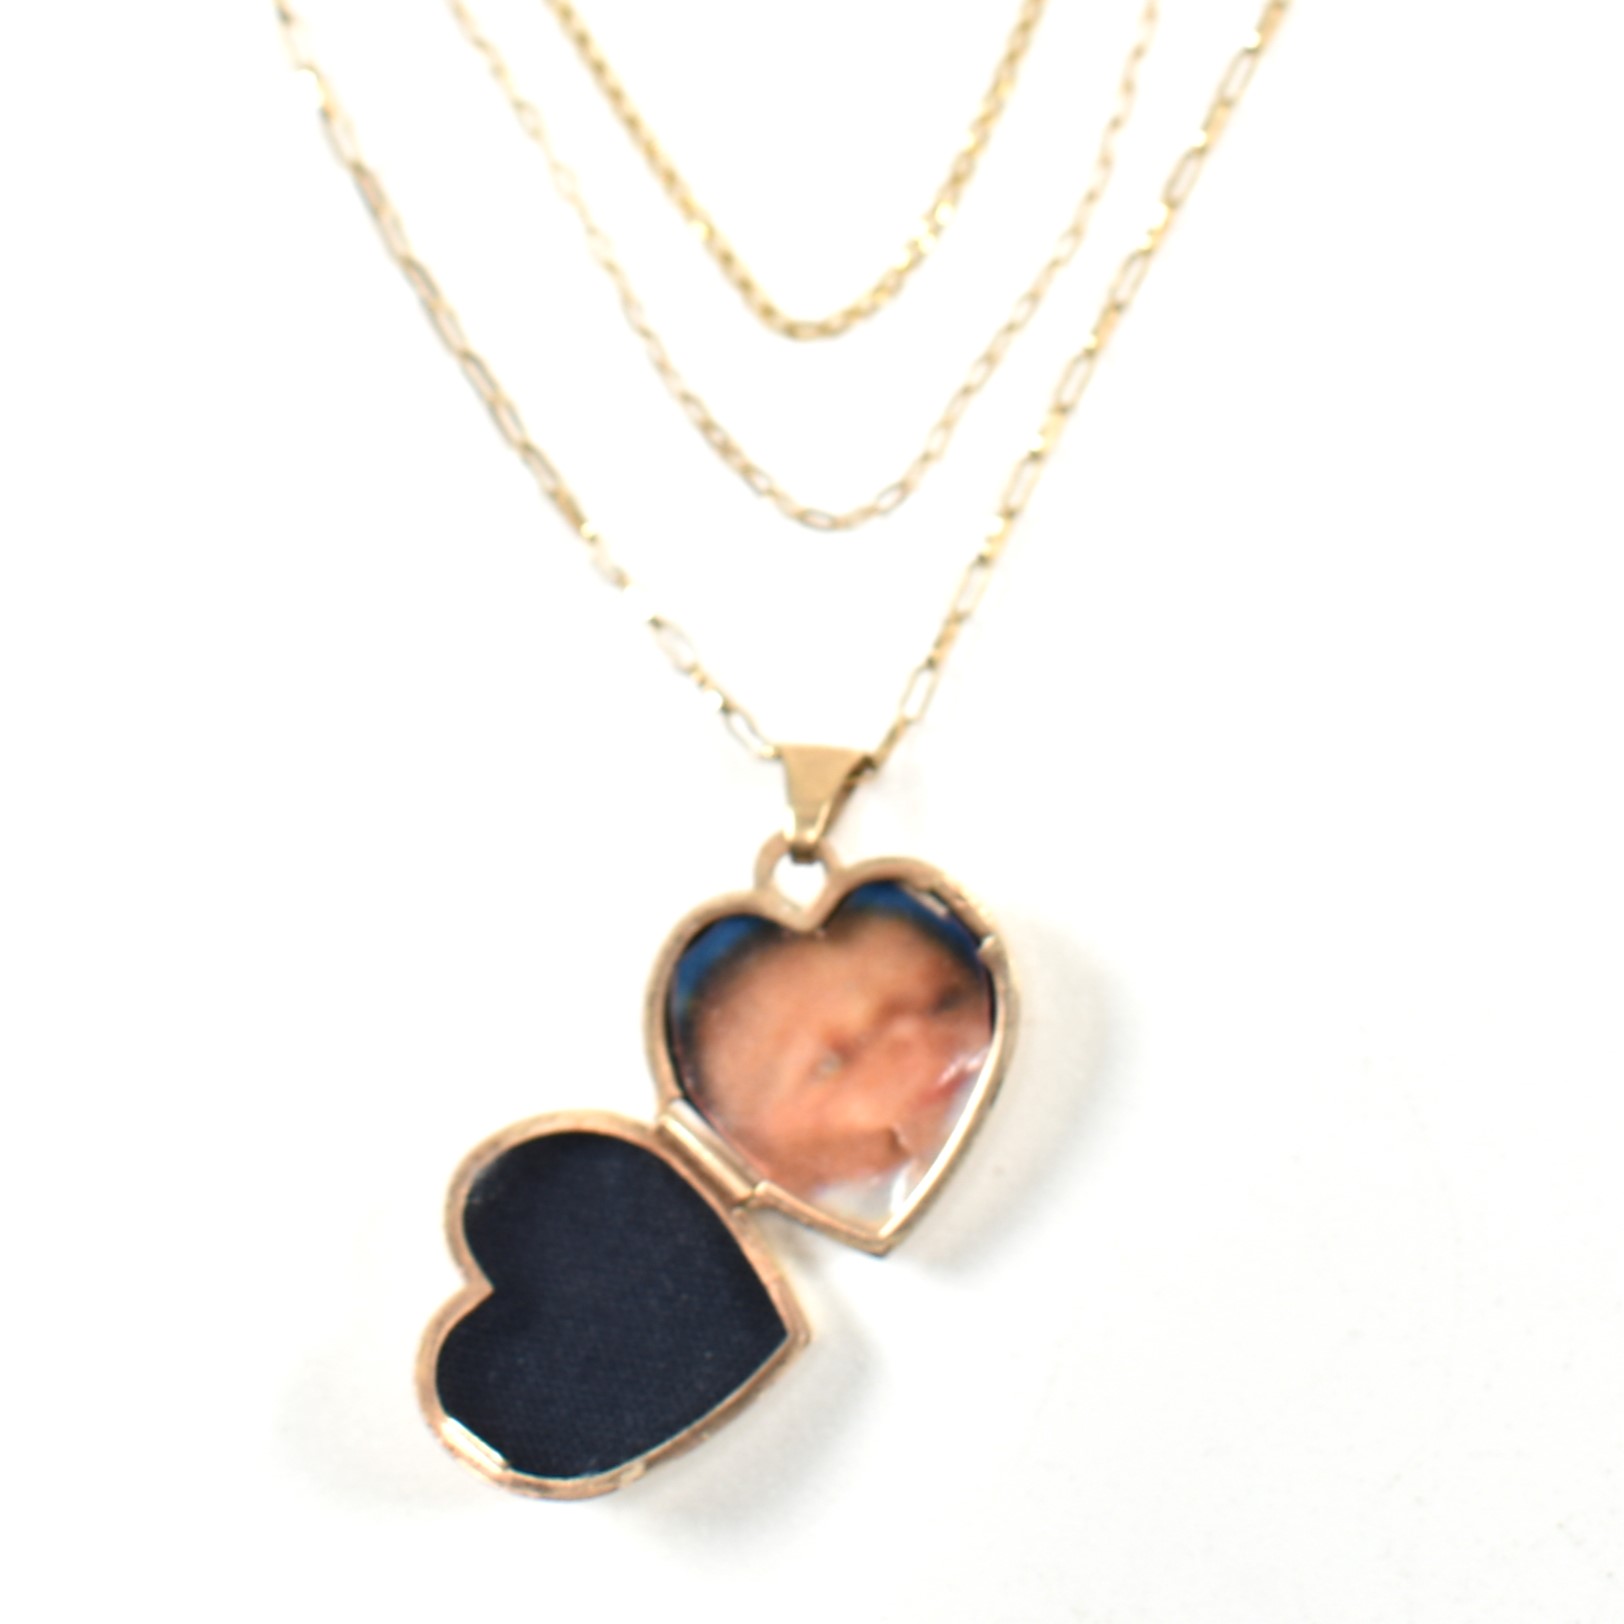 COLLECTION OF 9CT GOLD NECKLACES INCLUDING LOCKET - Image 2 of 6